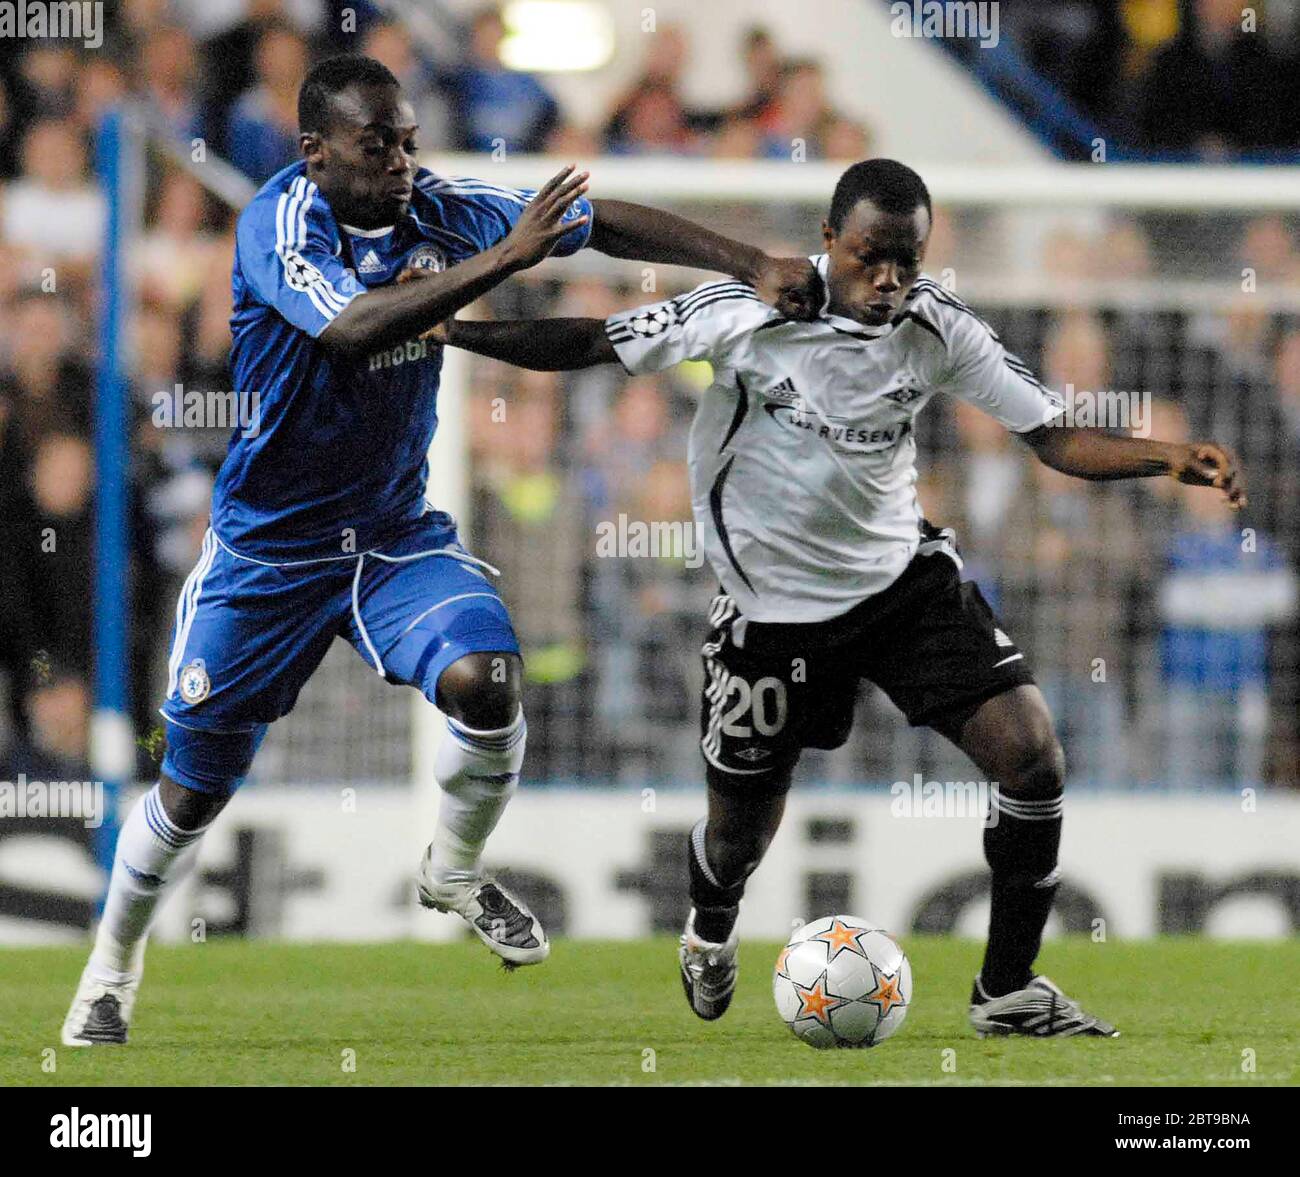 LONDON, UK. SEPTEMBER 18: Abdou Razack Traore (Rosenberg) and Michael Essien (Chelsea) tussle to get the ball during UEFA Champions League Match day 1 Stock Photo